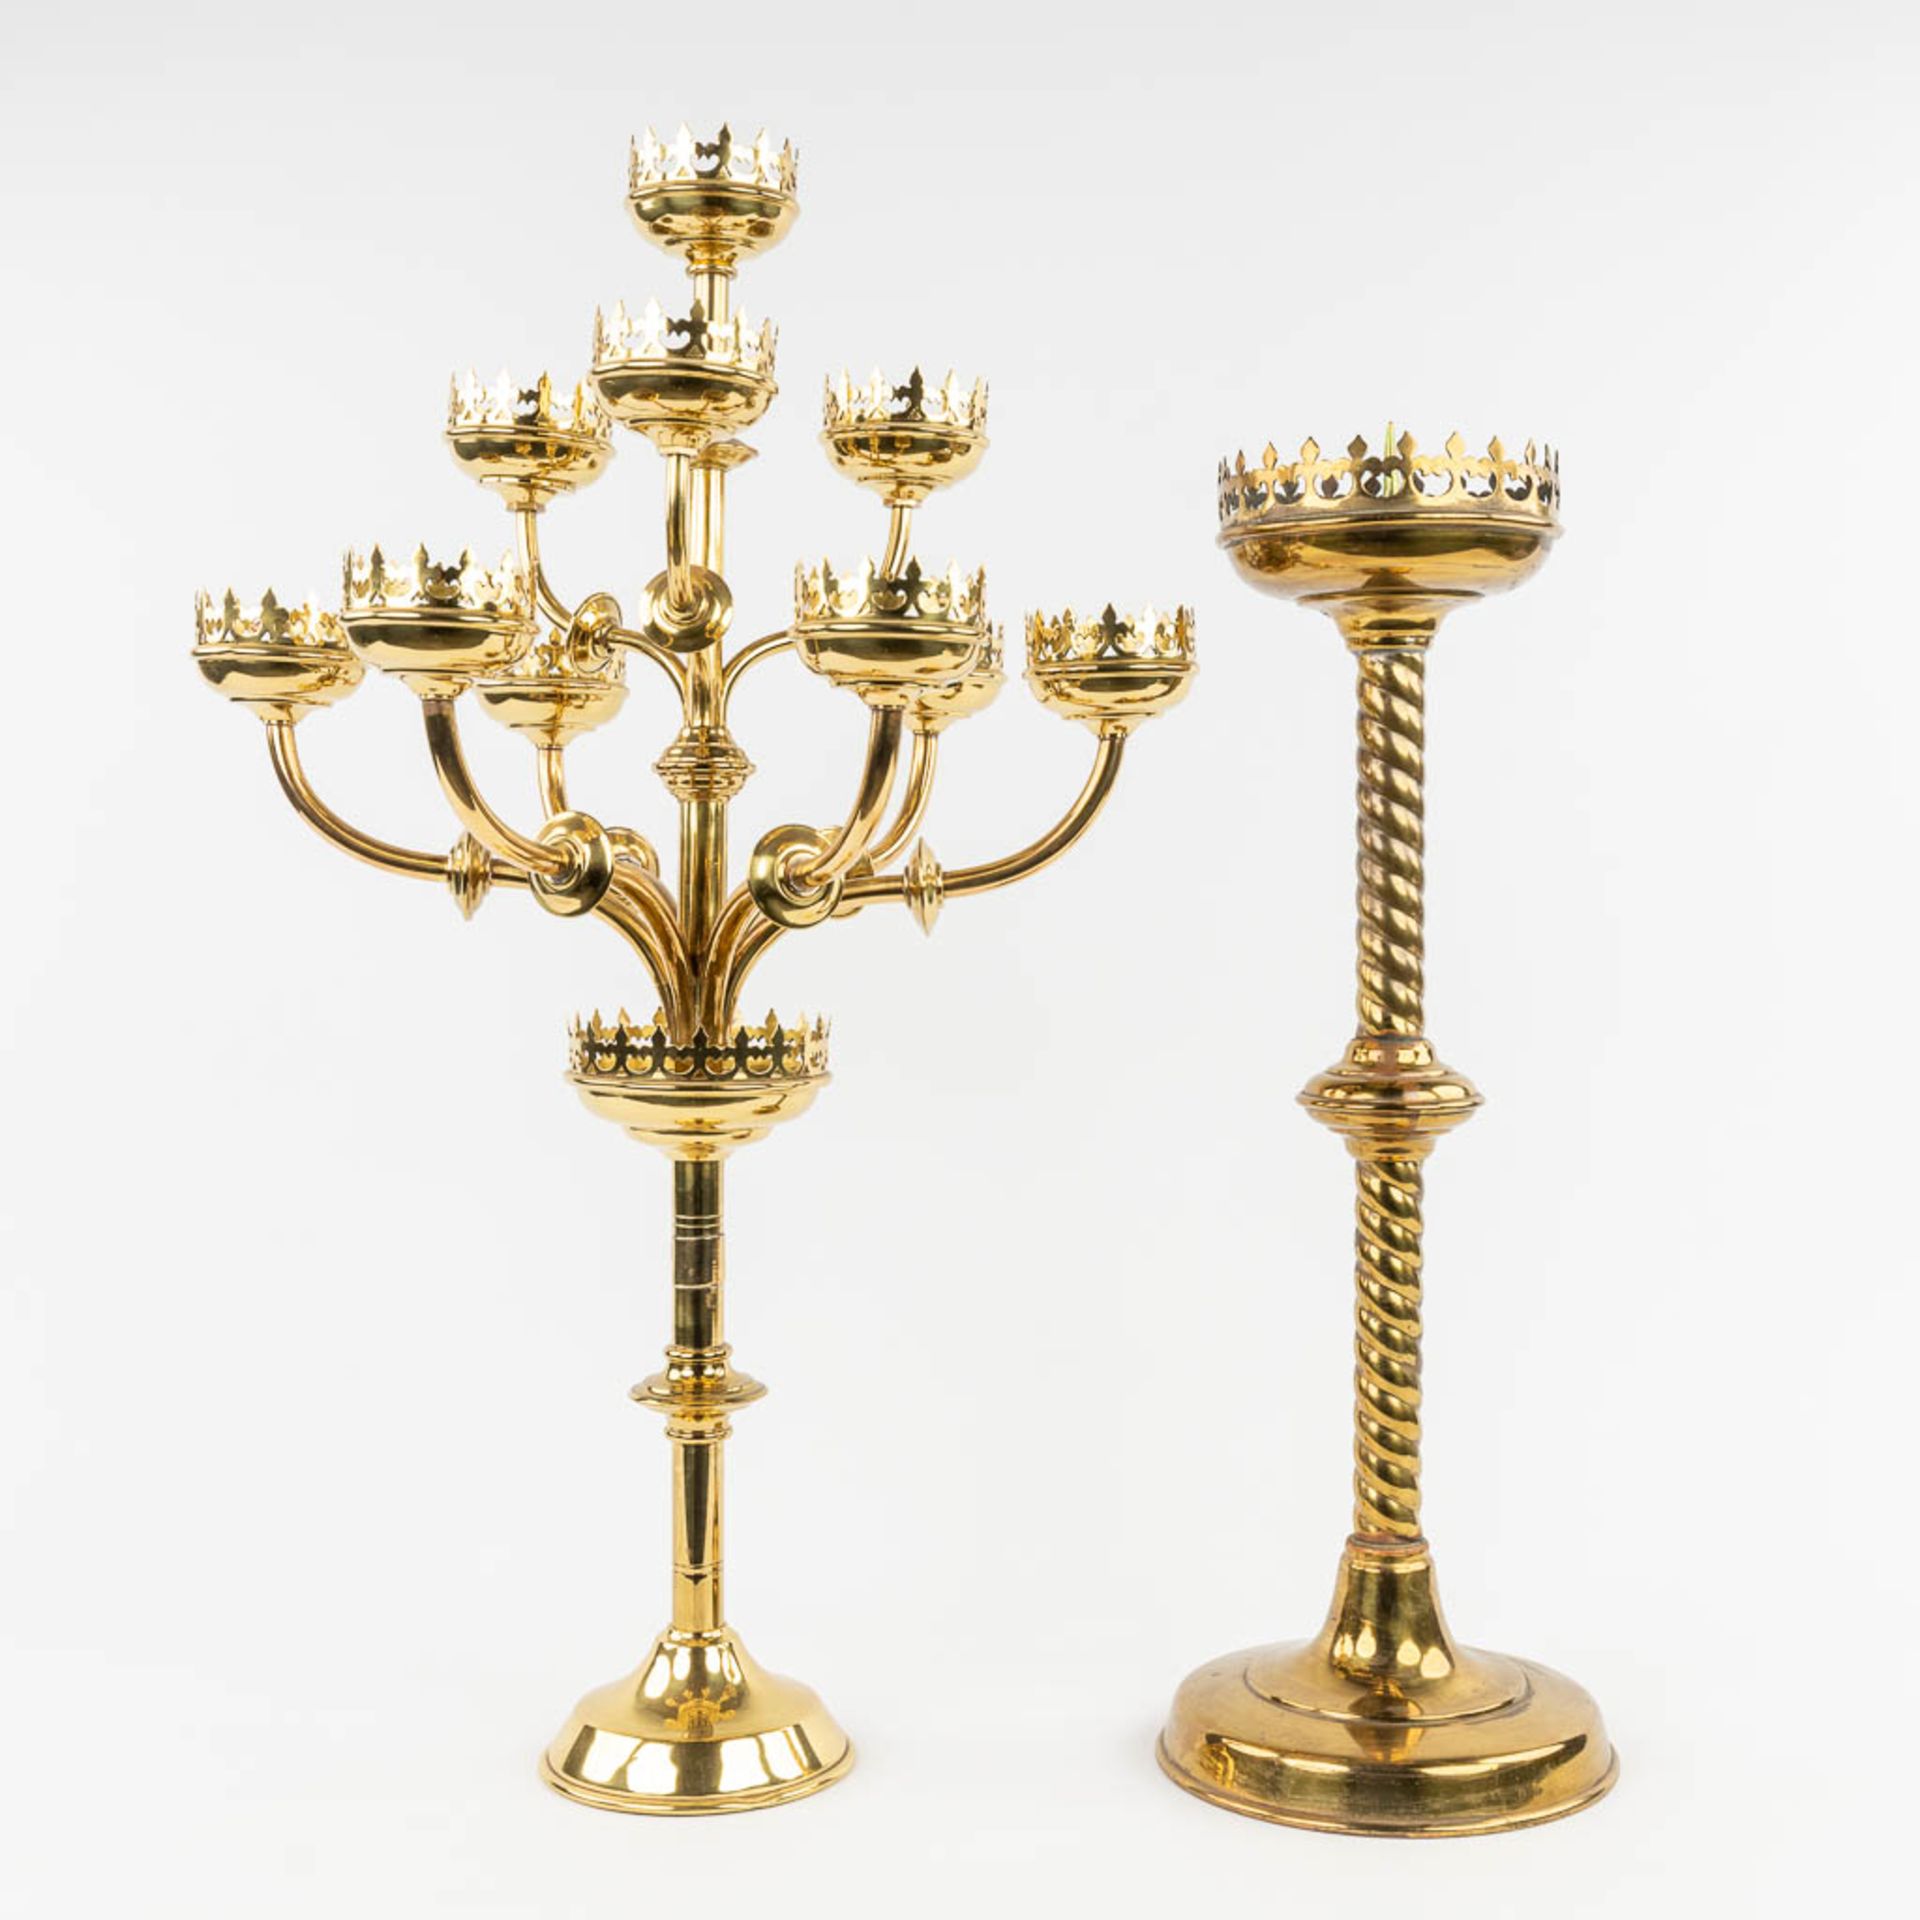 A candelabra with 10 points of light, gothic revival, added 1 candle holder. 20th C. (H:73 x D:45 cm